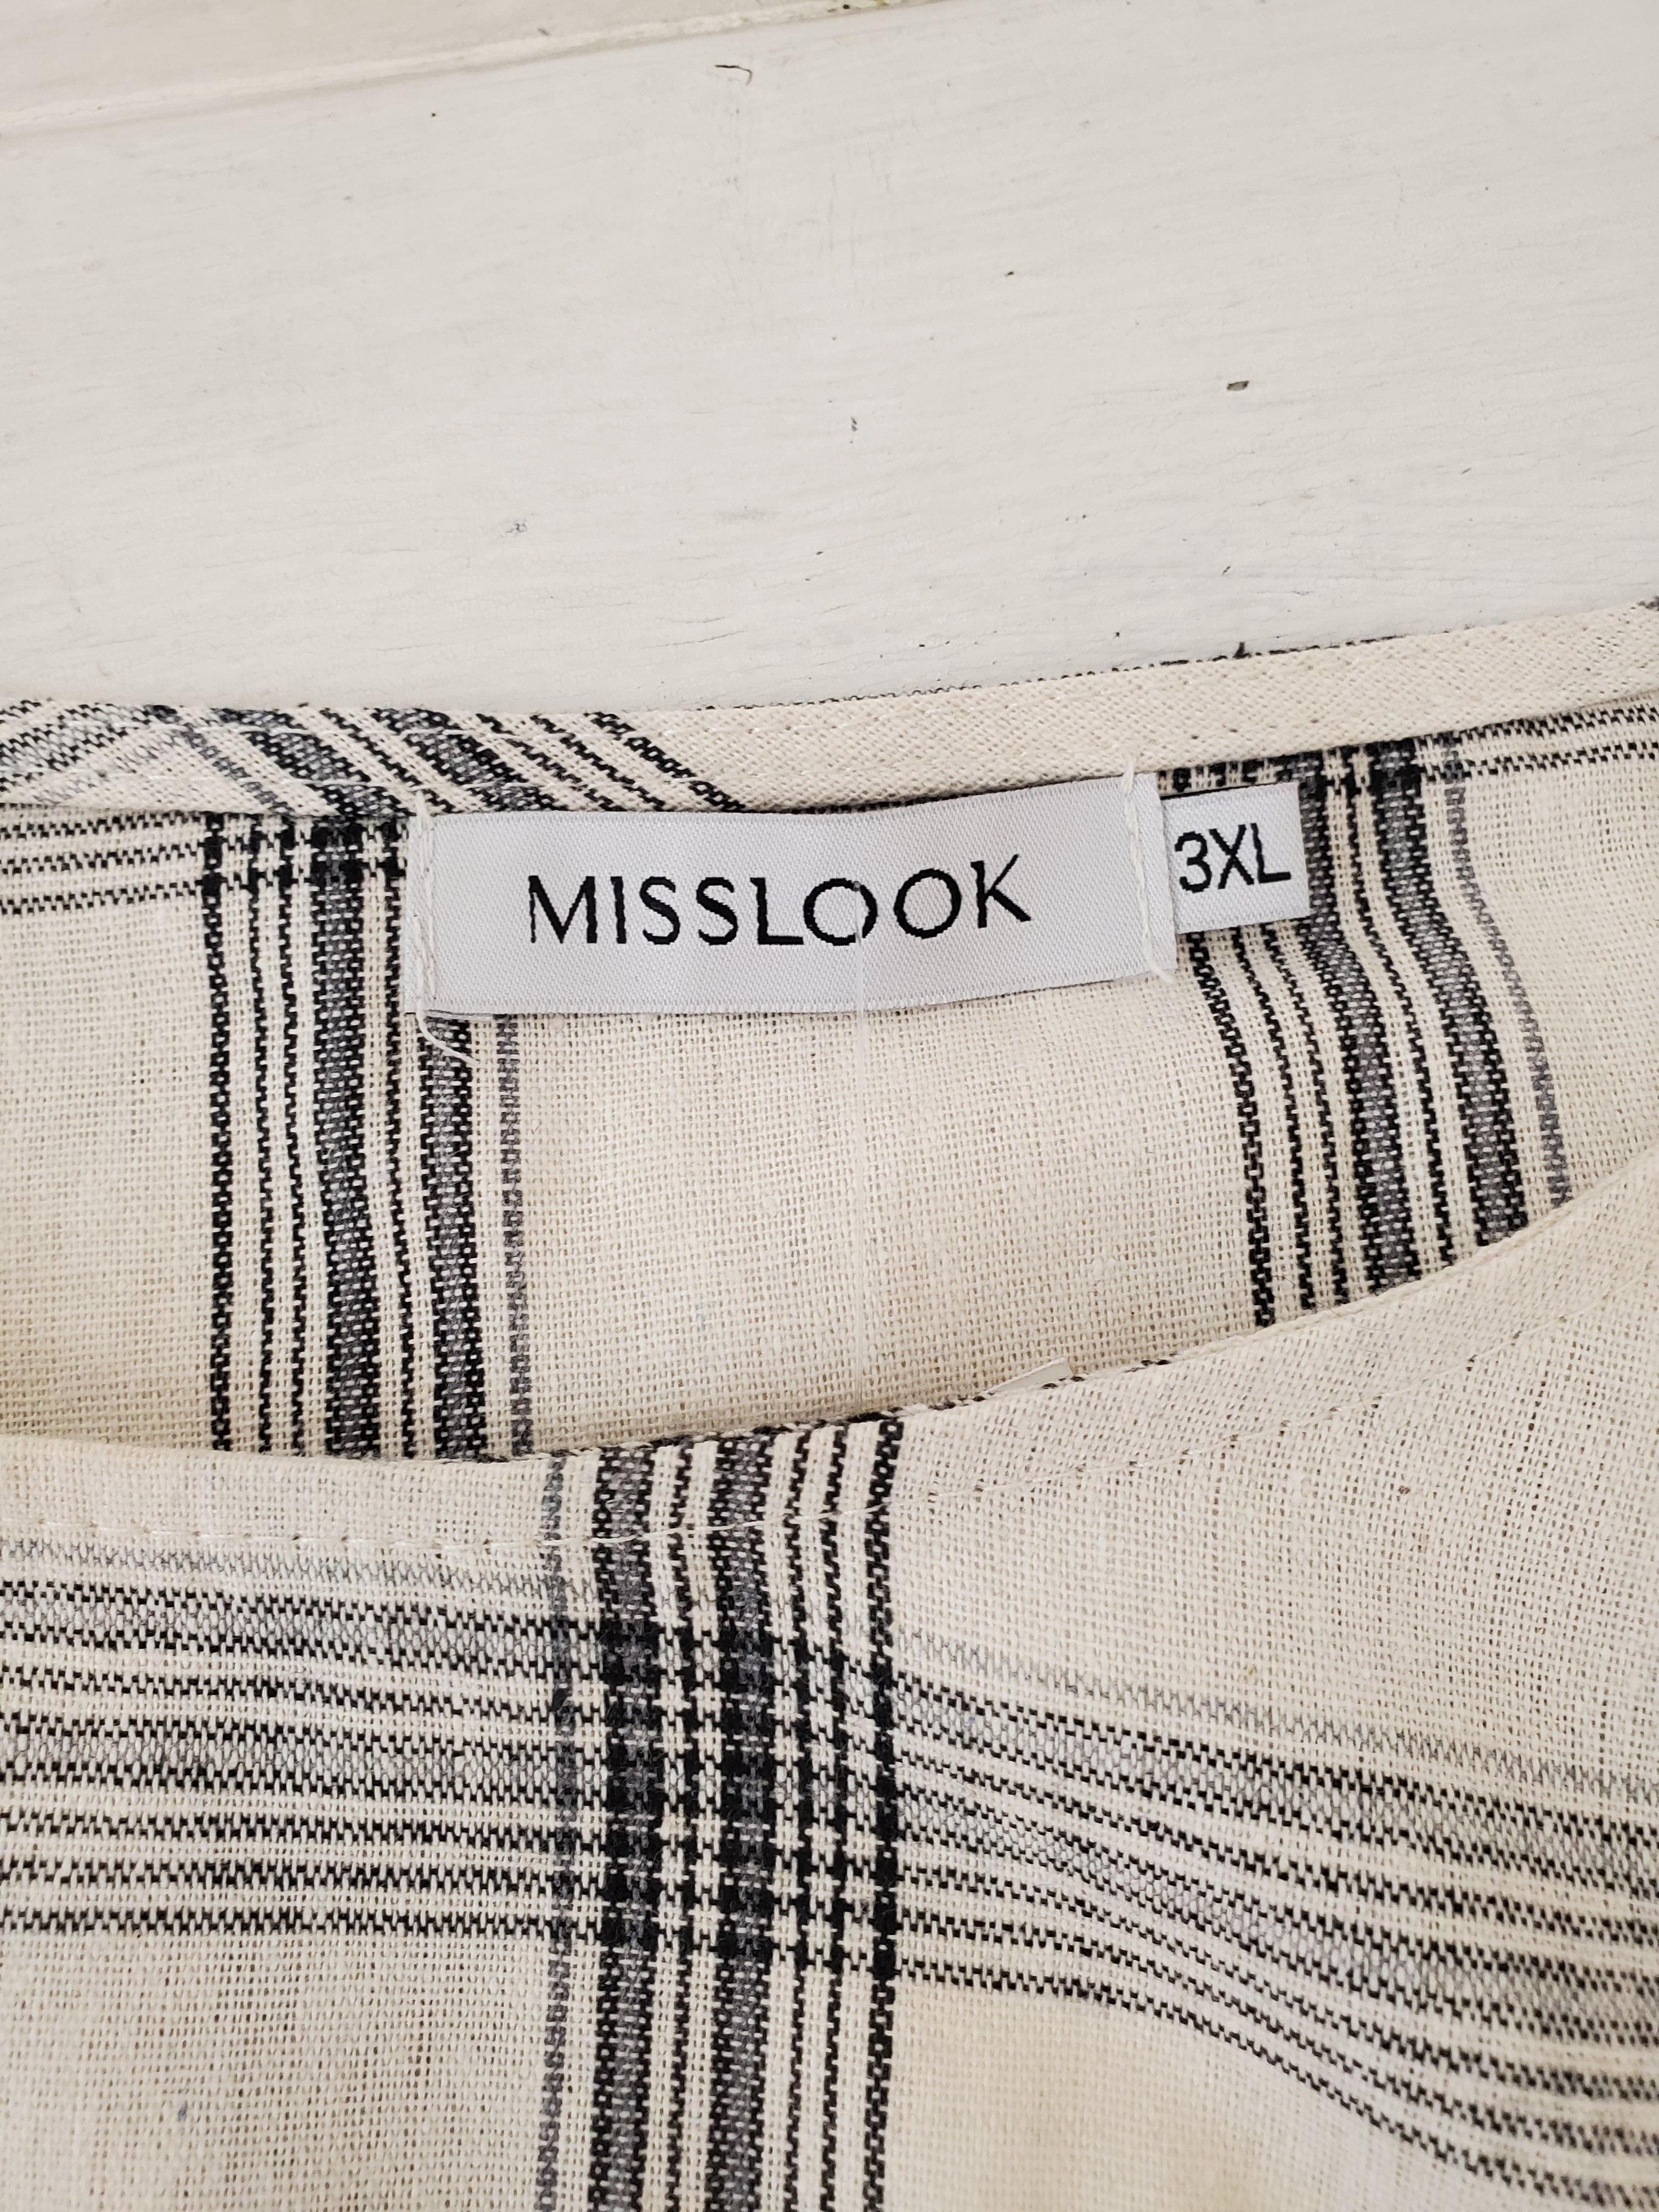 Mislook